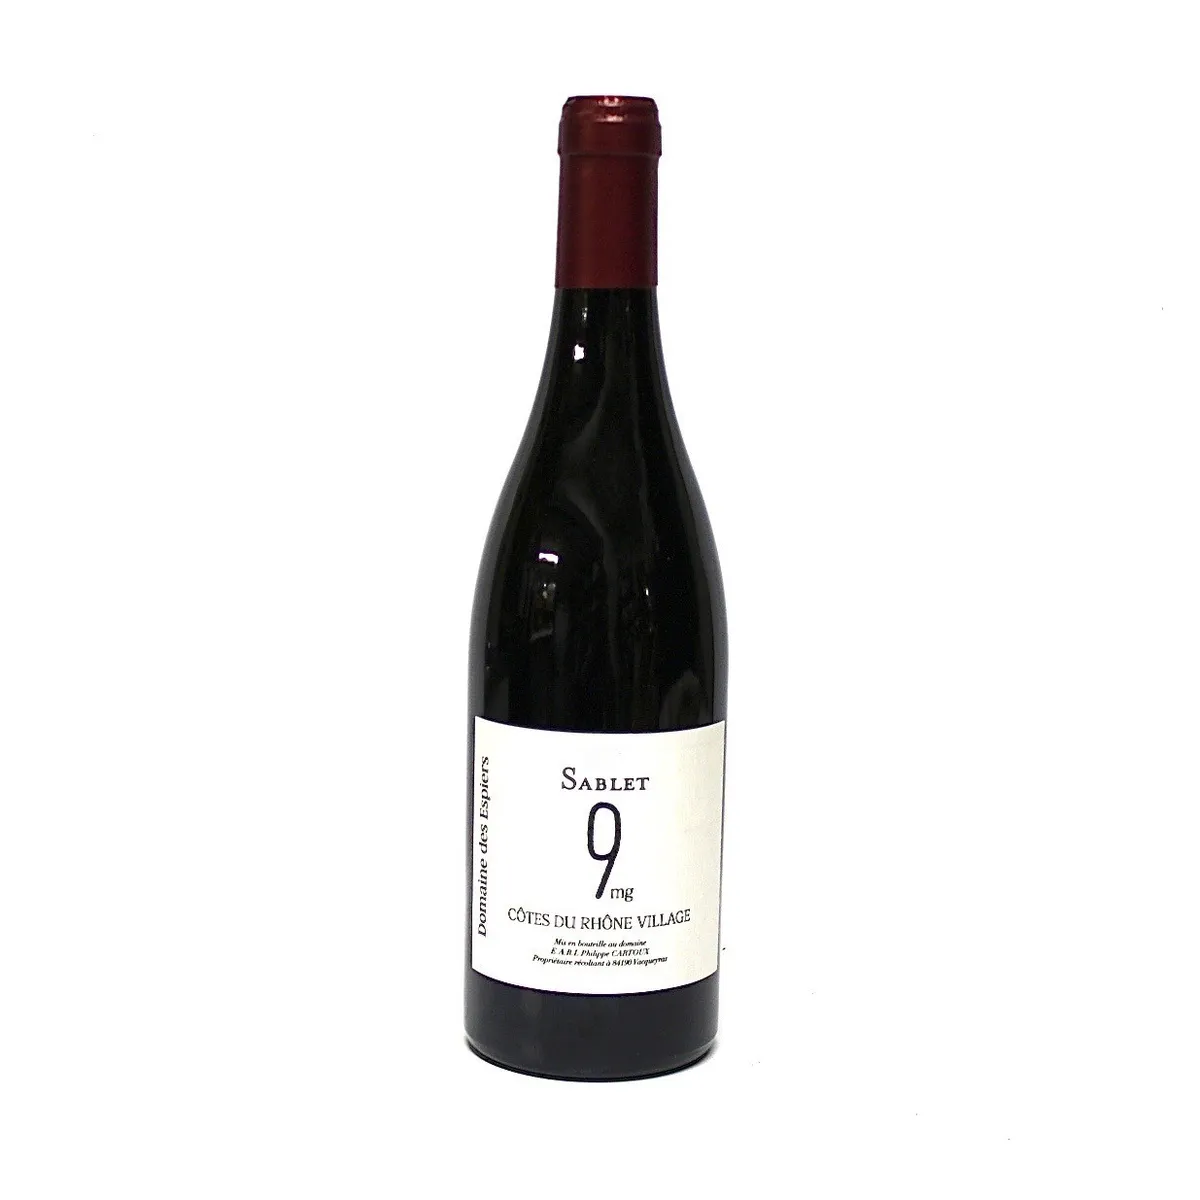 ratings of the village red rhone sablet domain des Espiers 2018 75cl